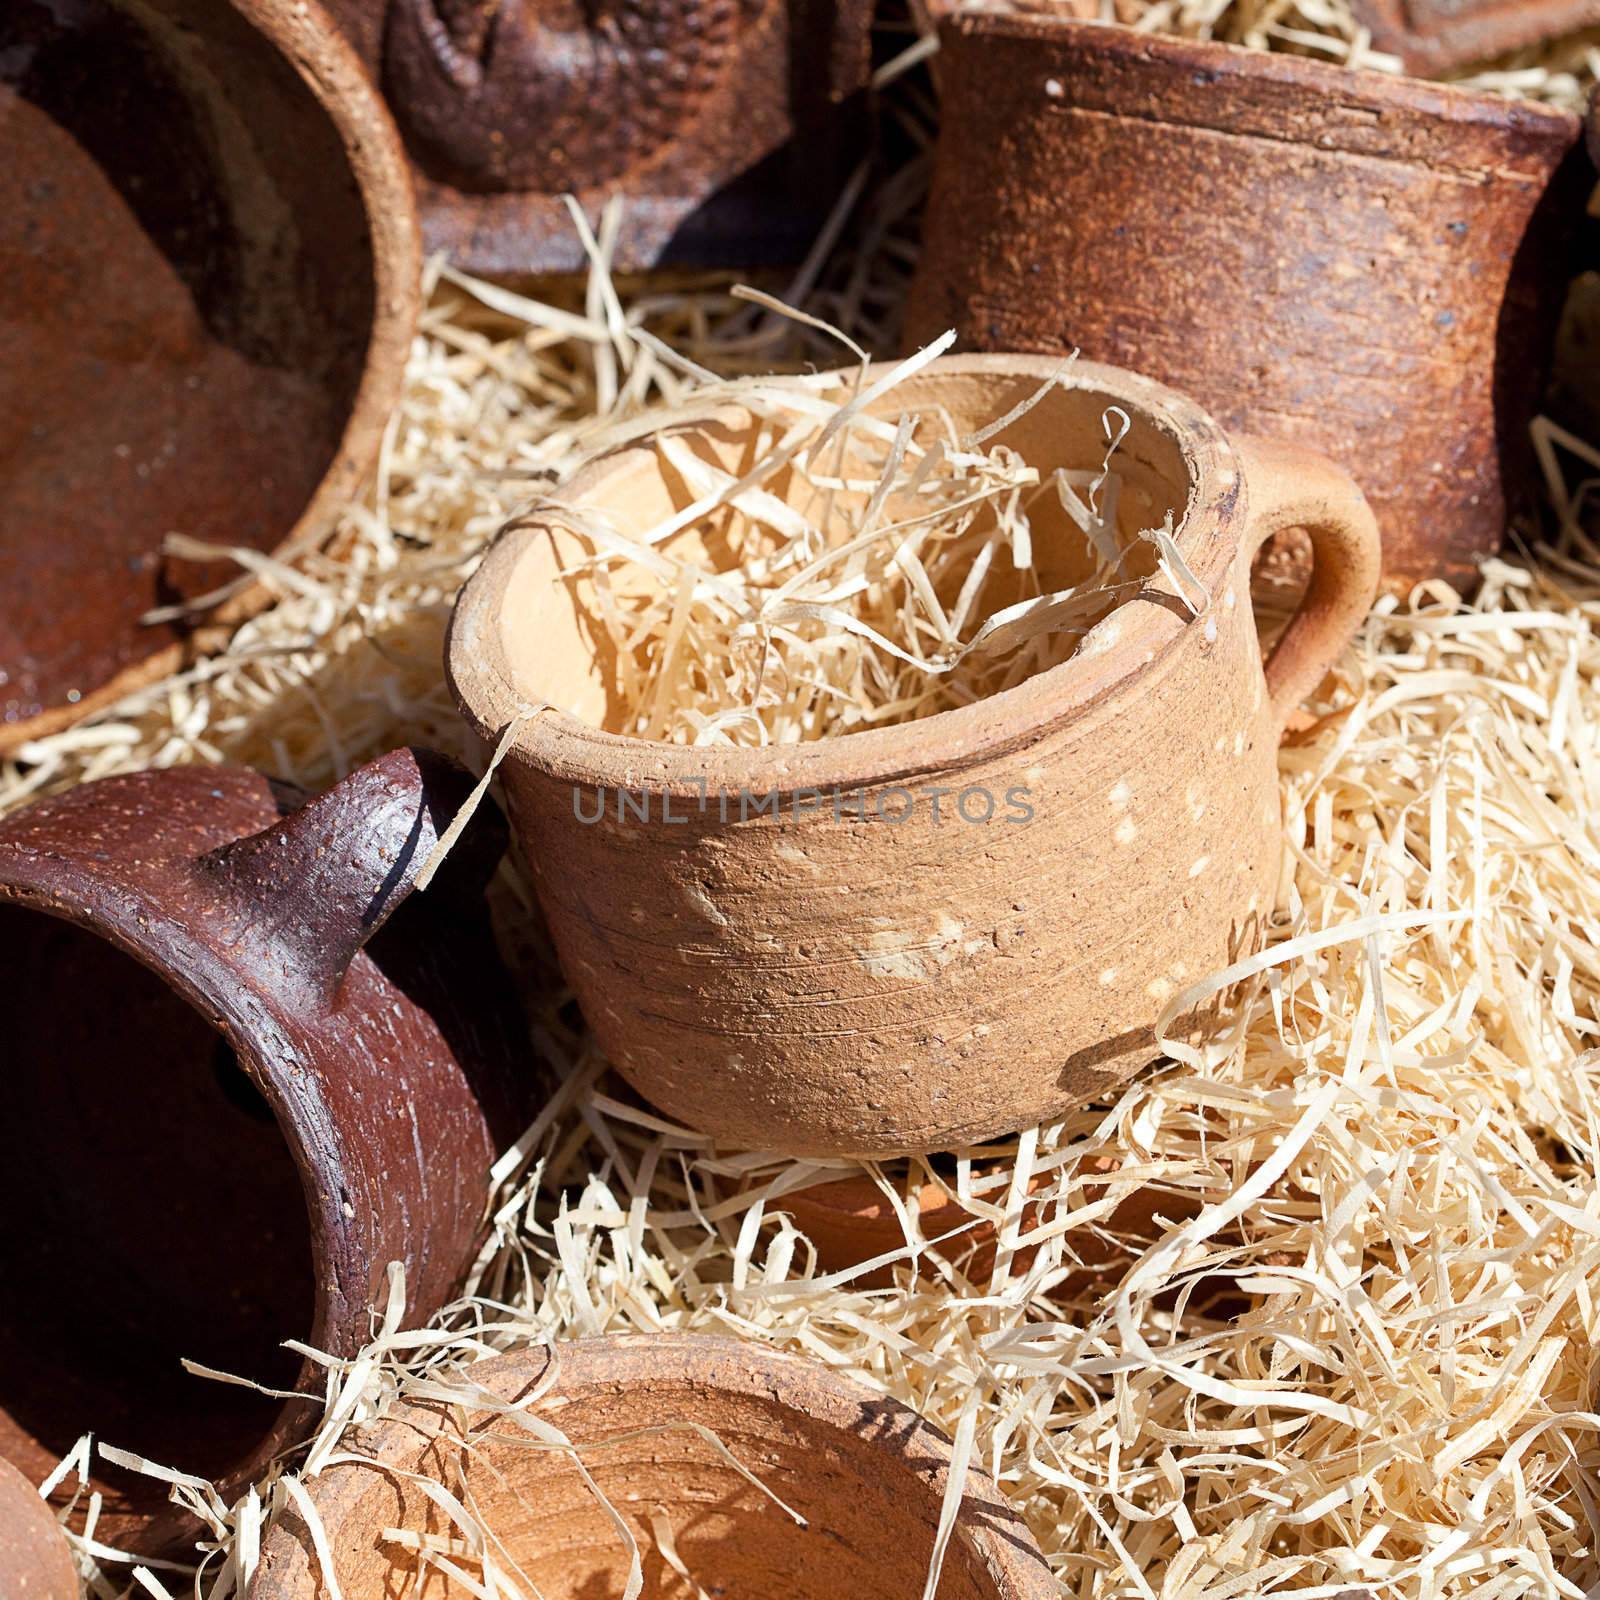 clay pots in the straw at the fair by jannyjus